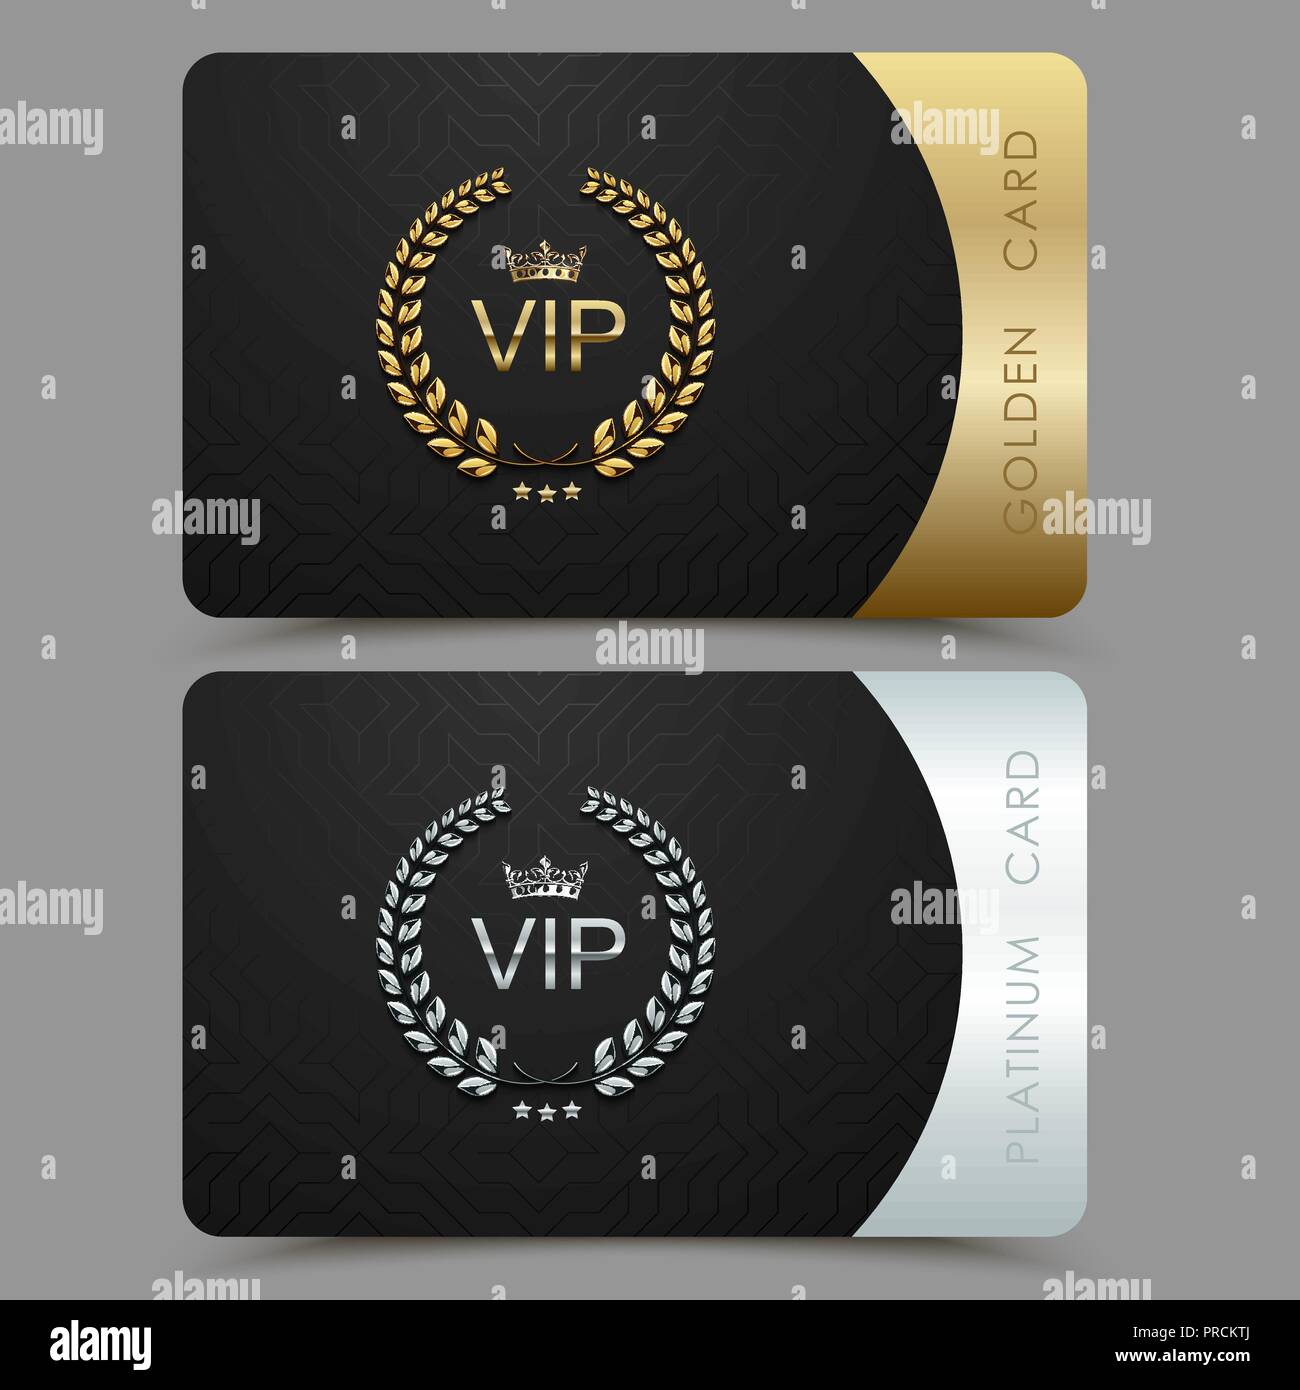 Vector VIP golden and platinum card. Black geometric pattern background with crown laurel wreath. Luxury design for vip member. Stock Vector